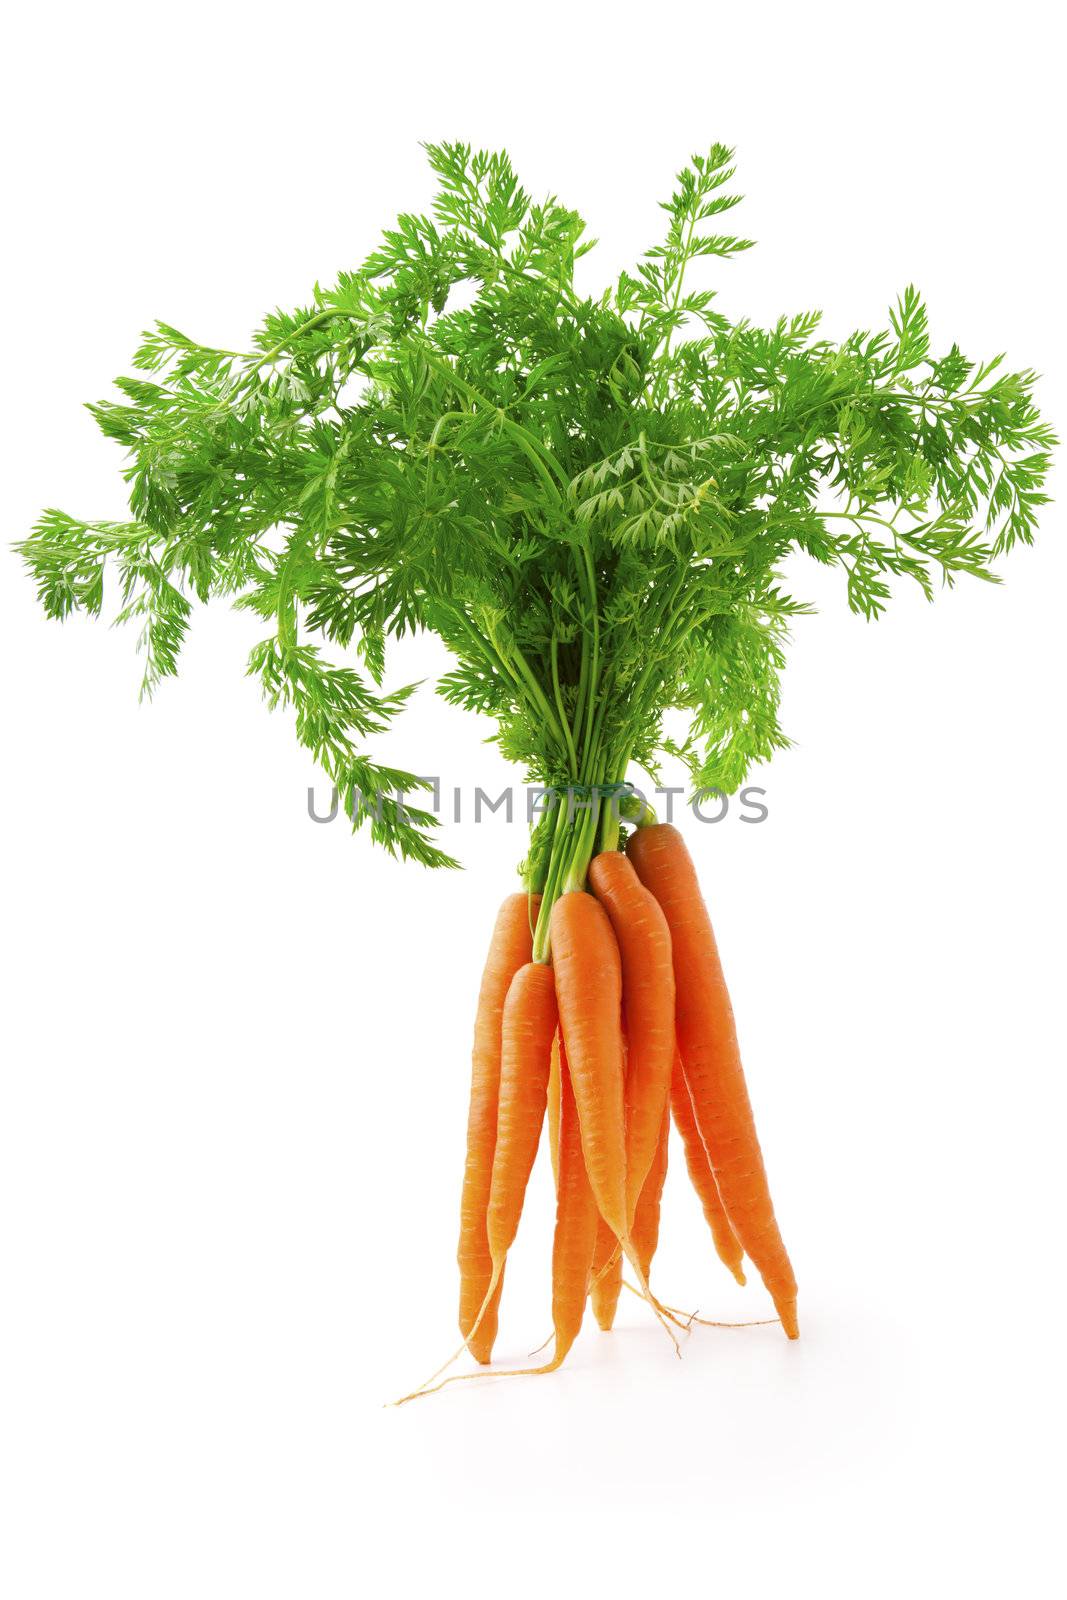 fresh carrot fruits with green leaves, isolated on white background  by motorolka